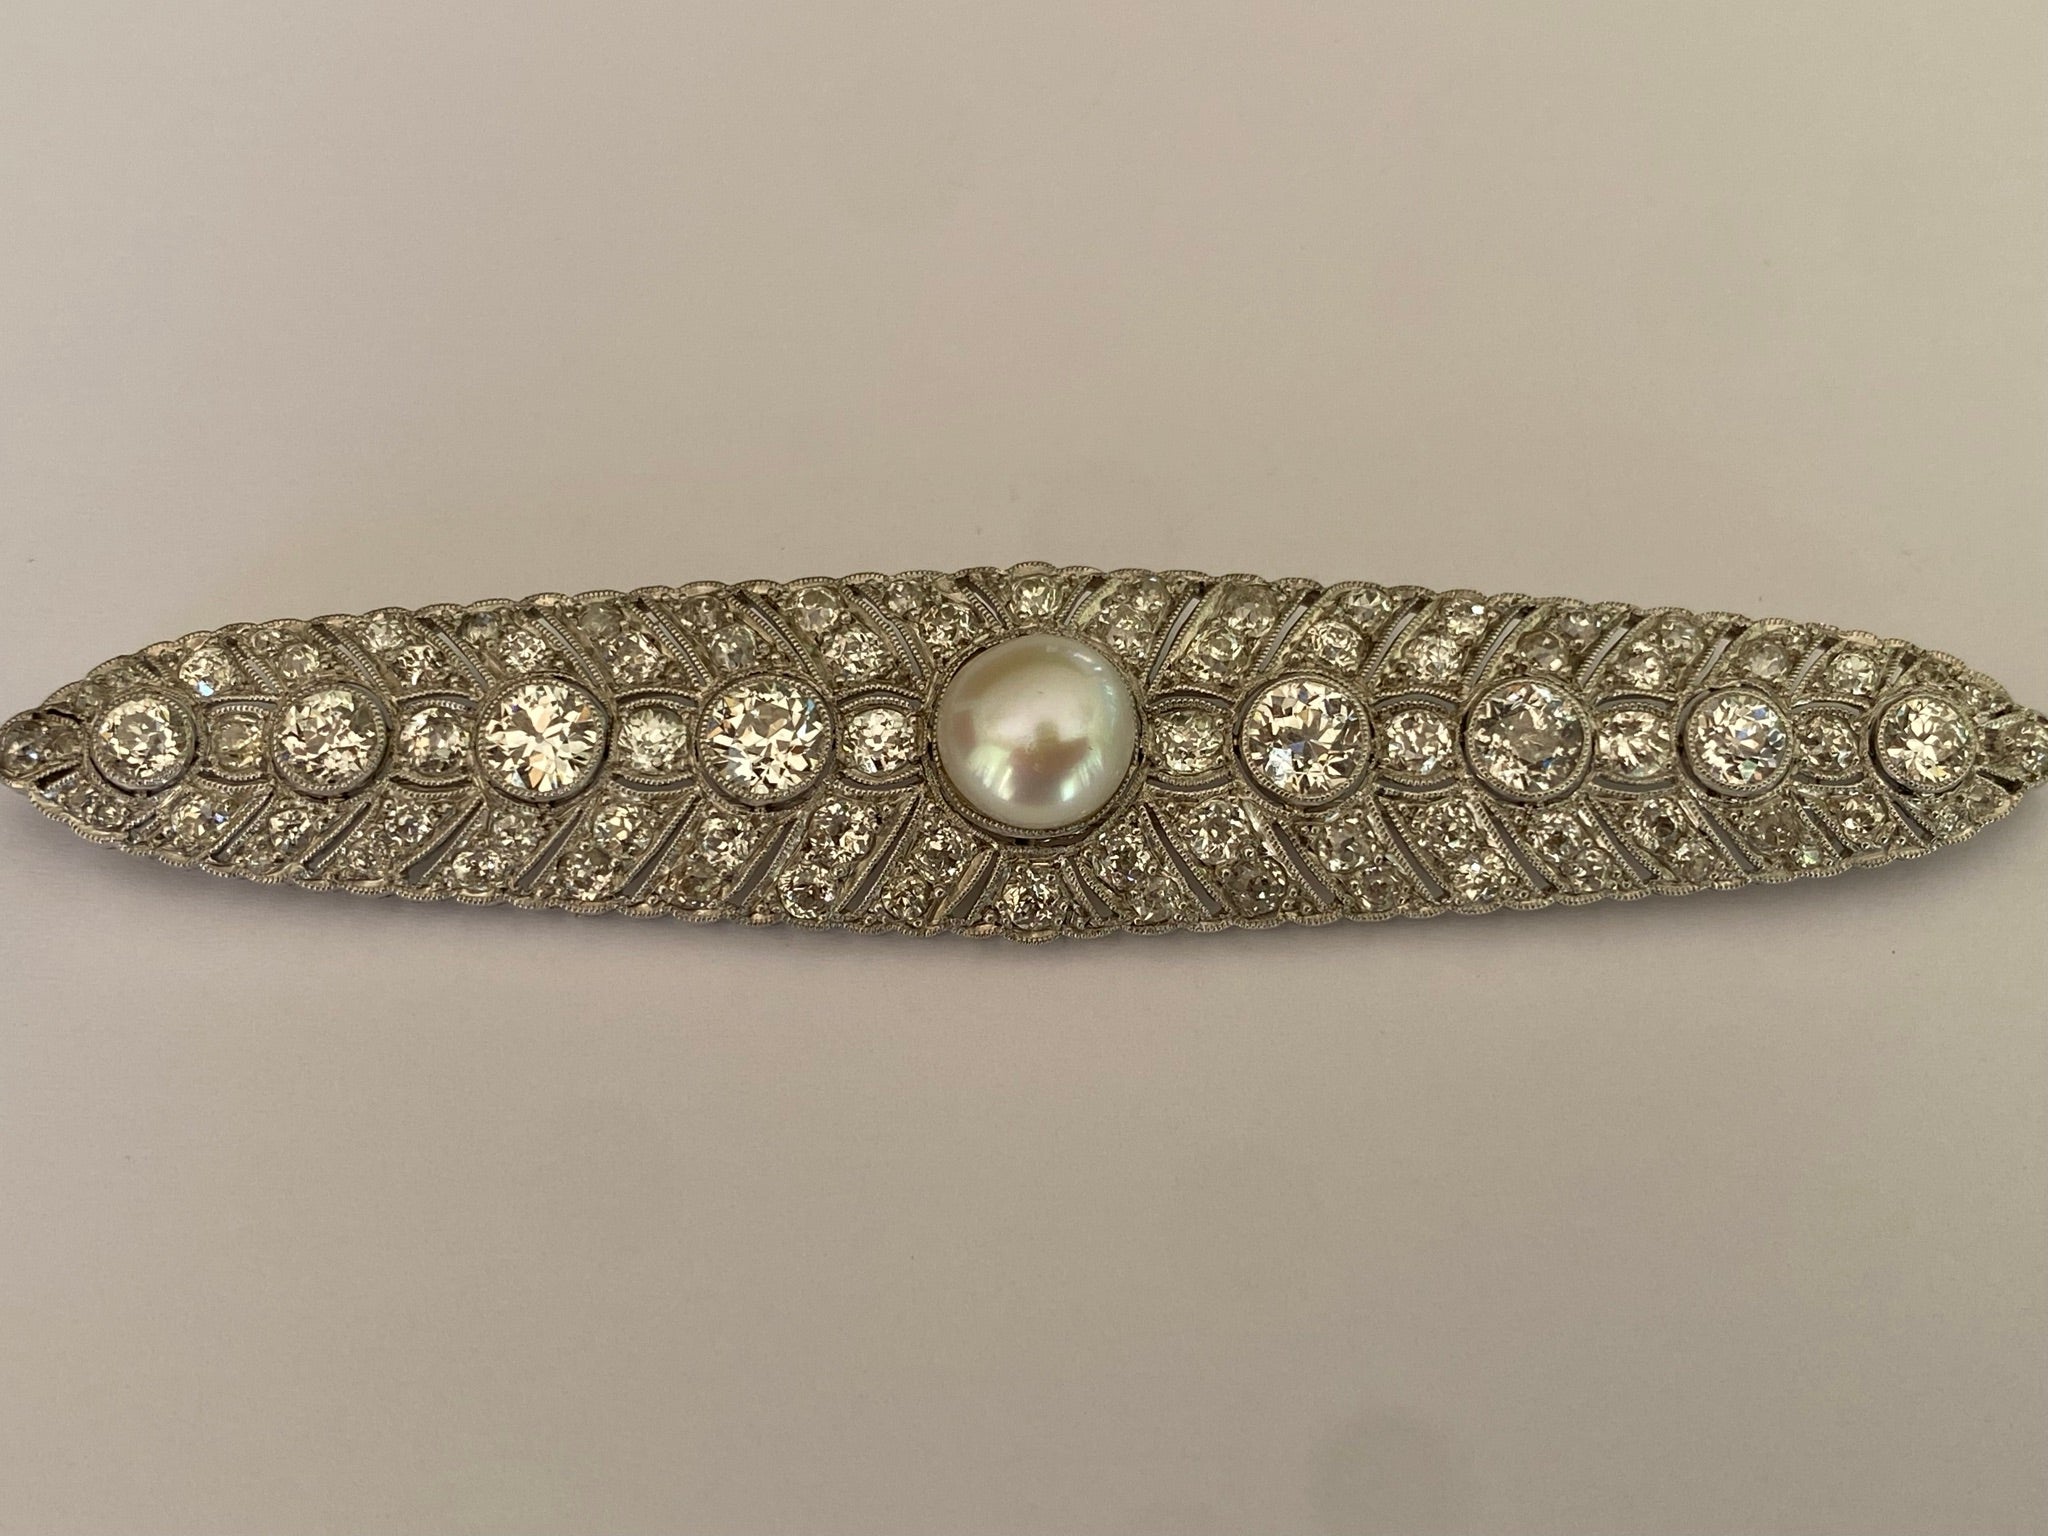 Crafted in the 1920s from platinum, this exquisite Art Deco brooch features a blister white pearl measuring 9 mm which sits in the middle of a line of eight Old European cut diamonds totaling approximately 4.00 carats, surrounded by a scallop design